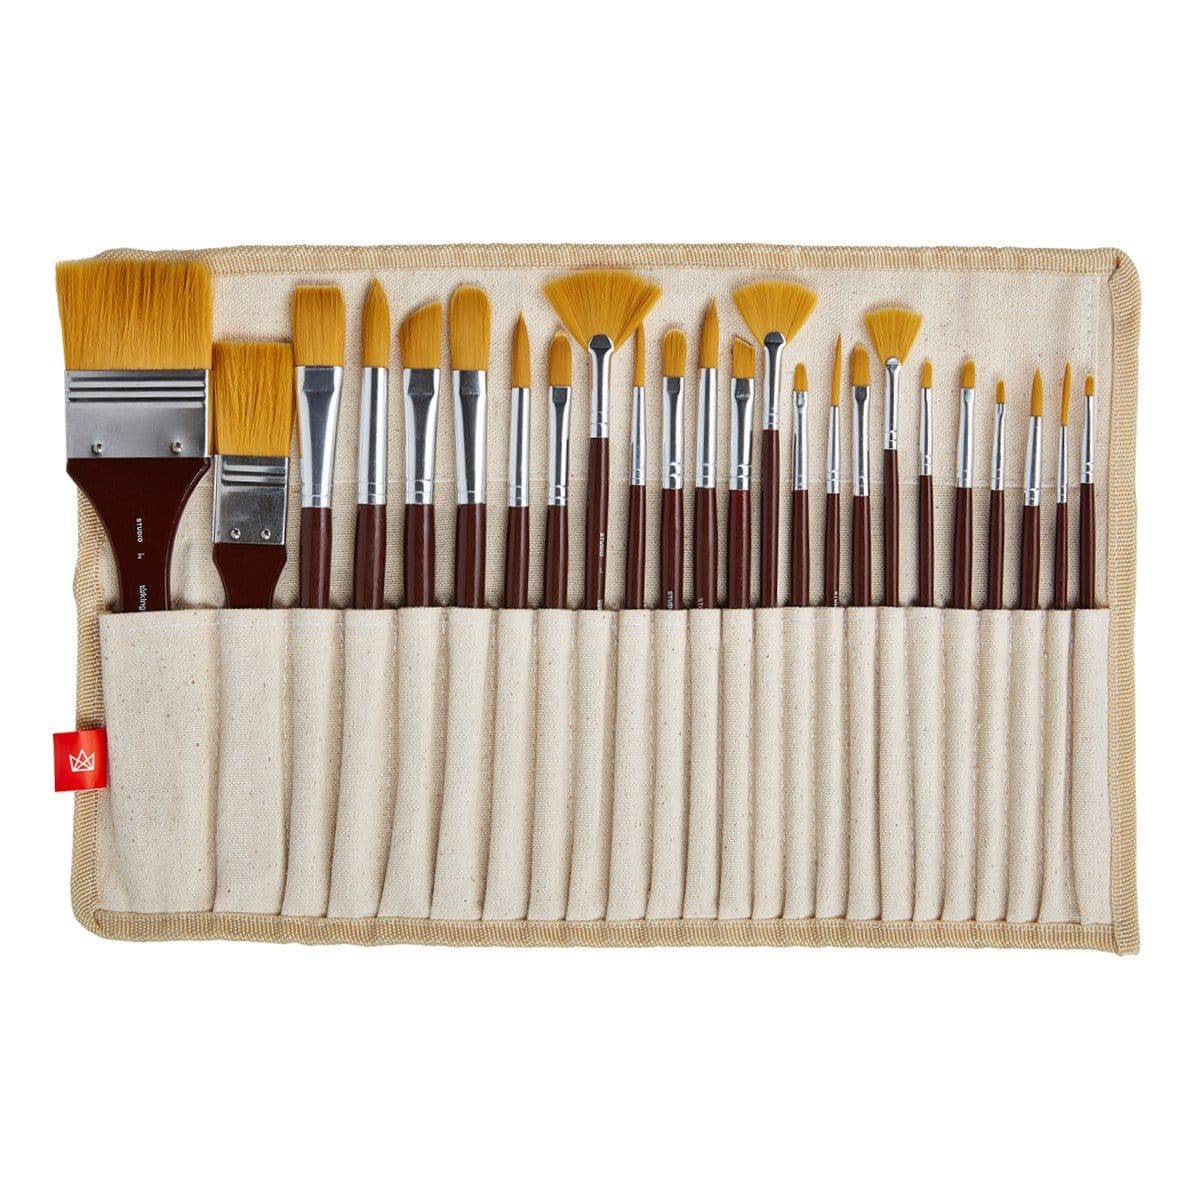 Jerry Q Art 12 PC Brown Synthetic Hair Round and Flat Paint Brush Set with  Short Wood Handles for Acrylic, Watercolor and All Media JQ59831 